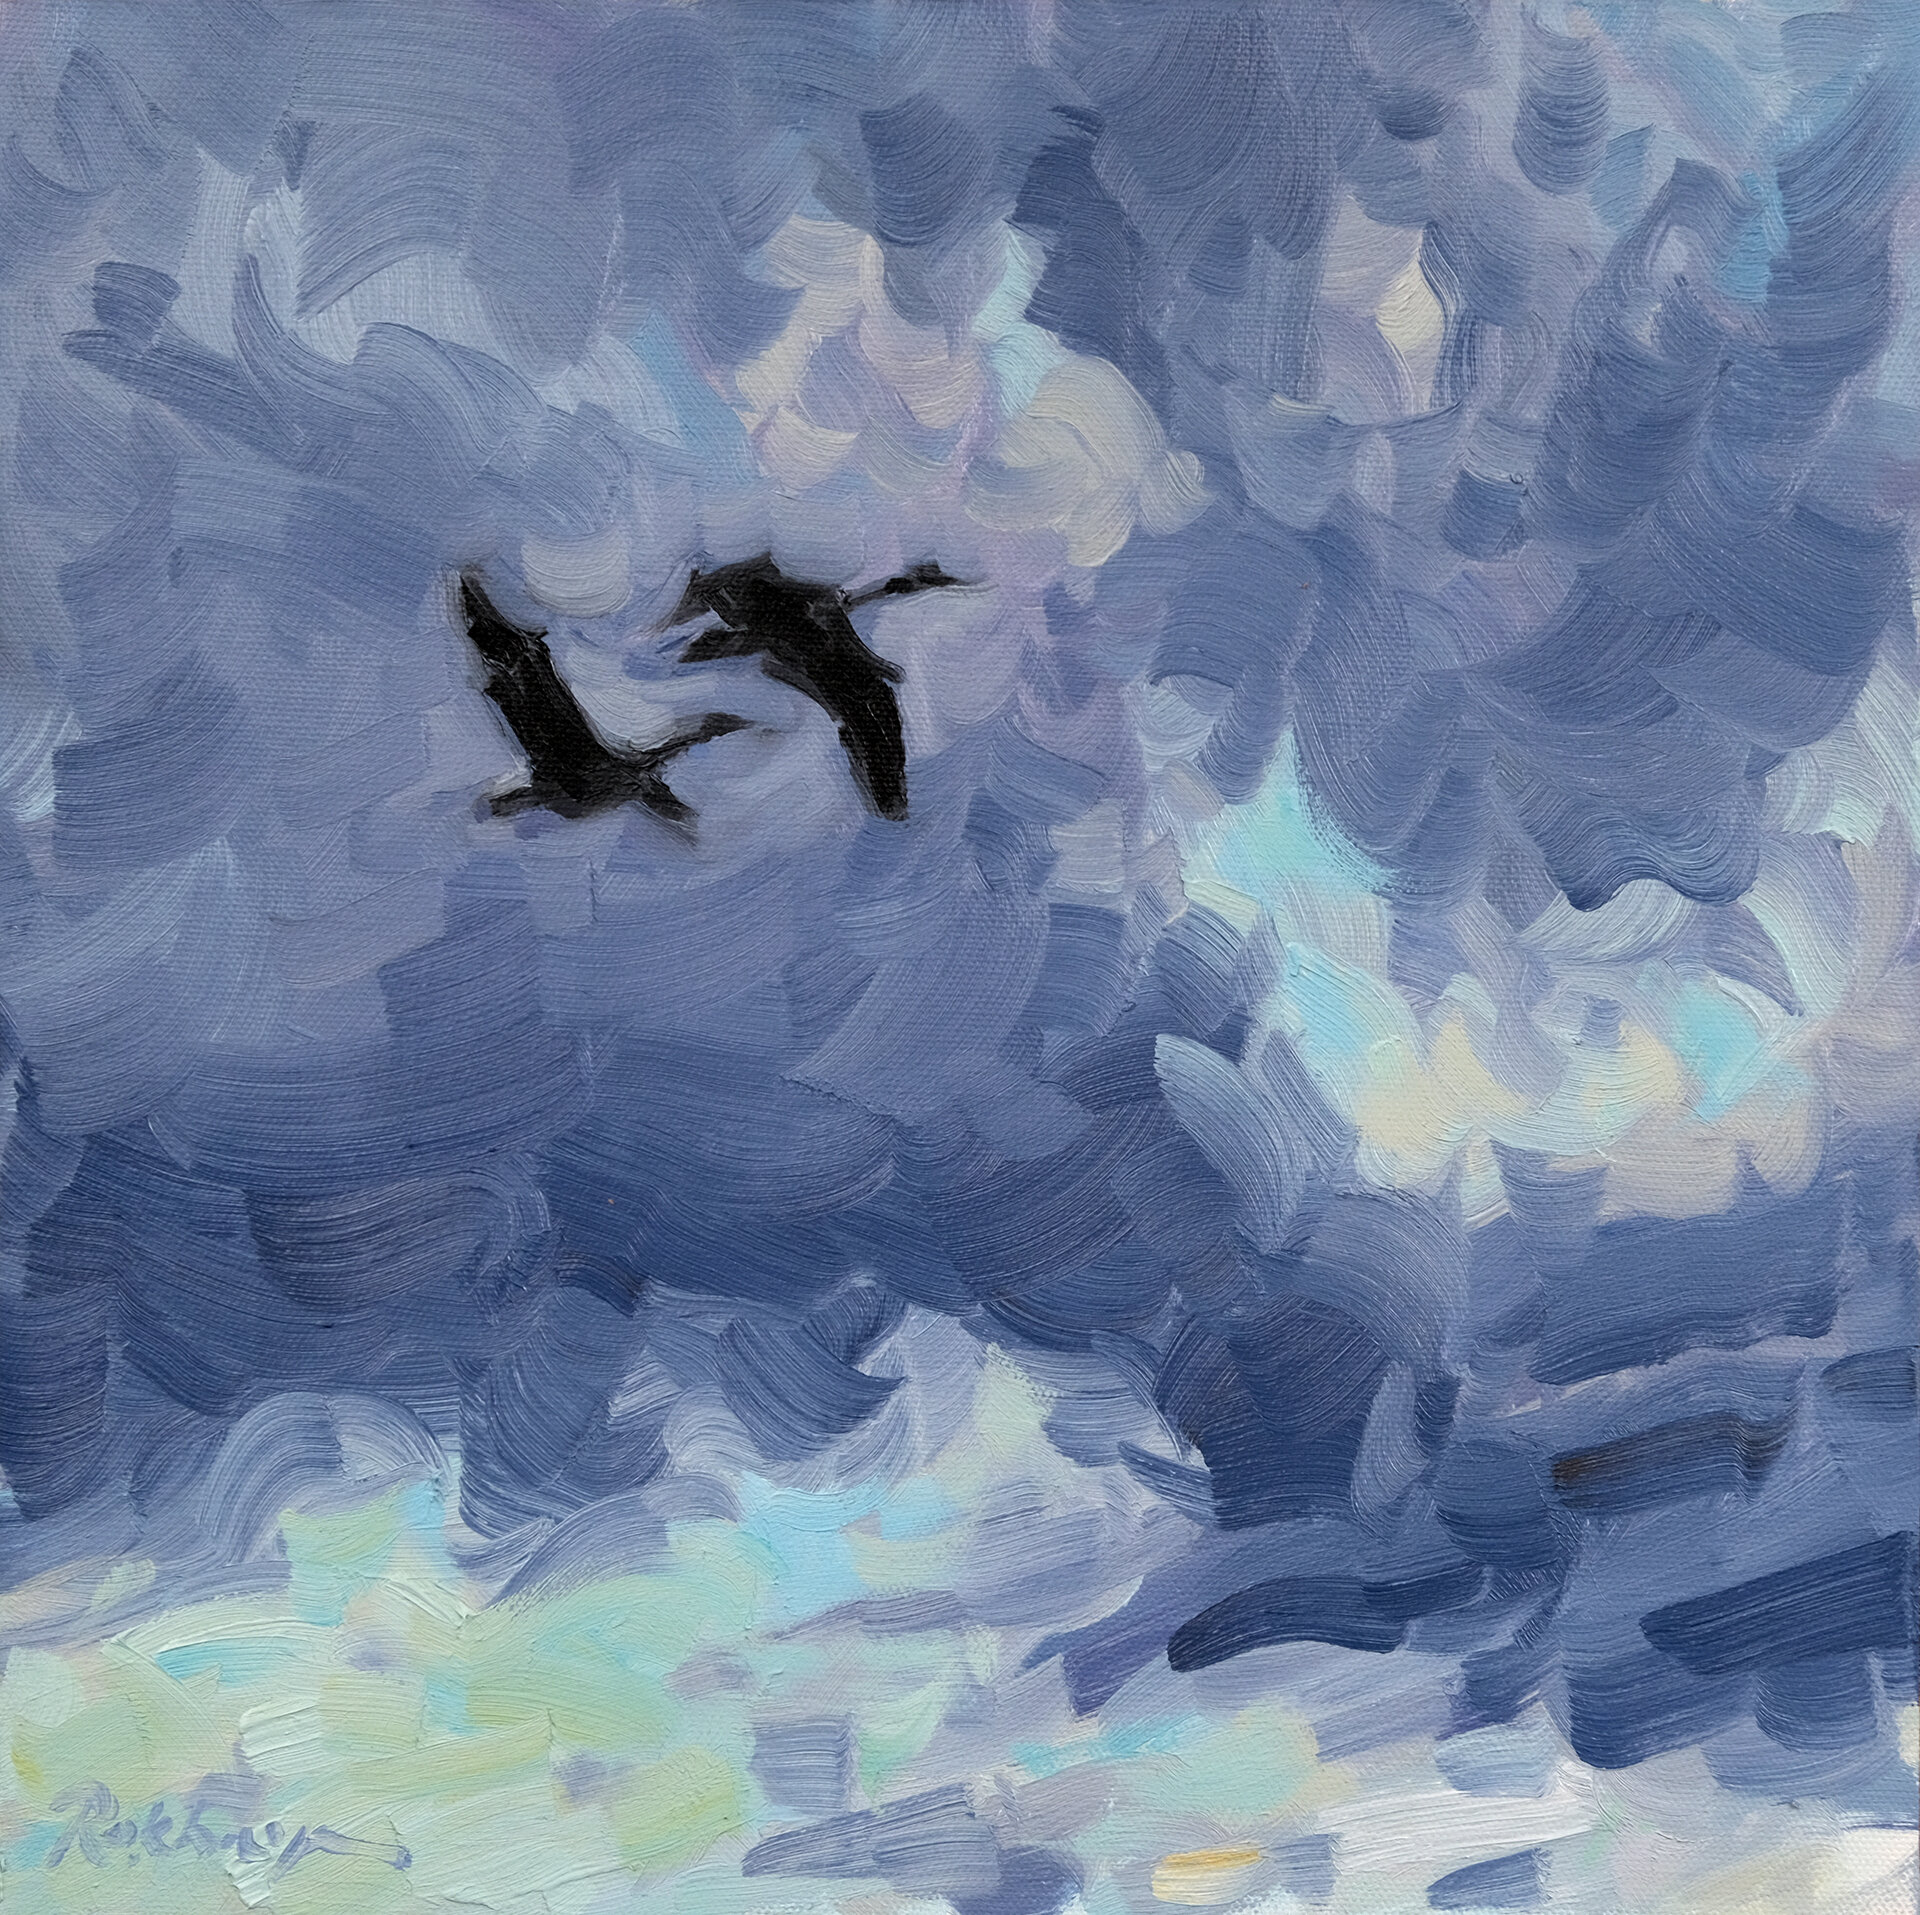 Out from the Clouds - Two Geese